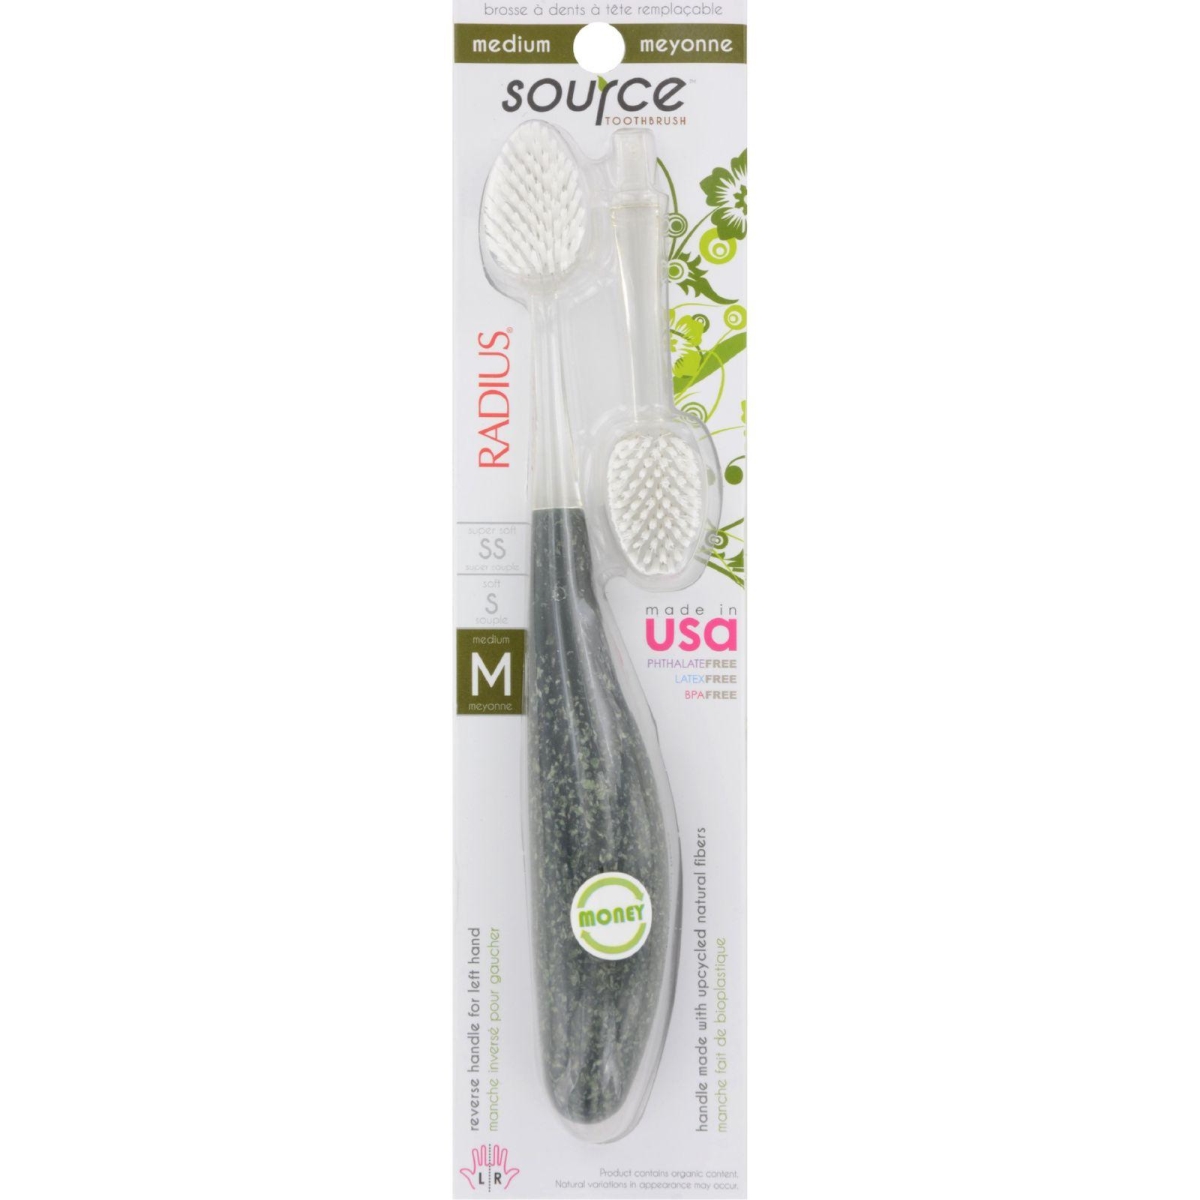 Hg0826156 Source Toothbrush With Replacement Head - Medium, Case Of 6